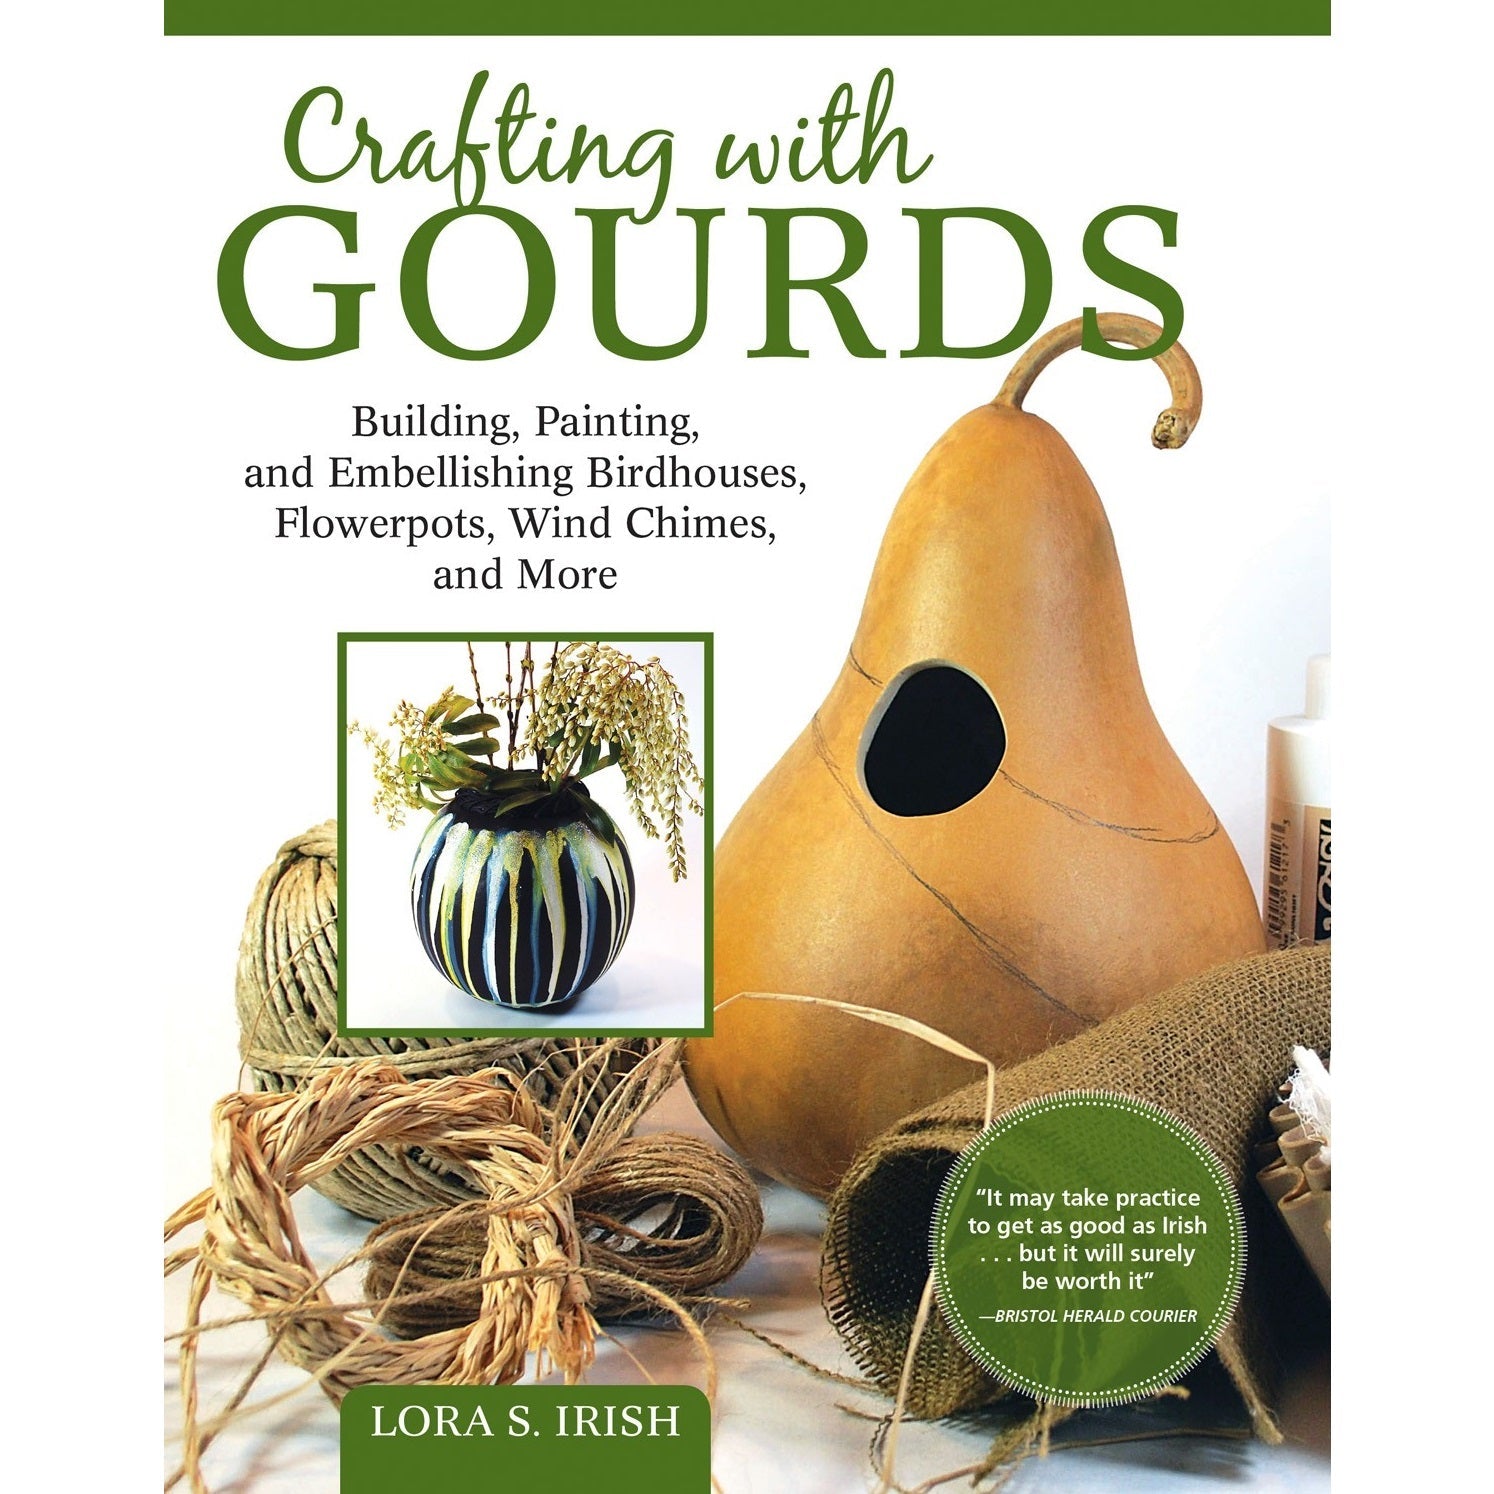 Crafting with Gourds Book by Lora S. Irish